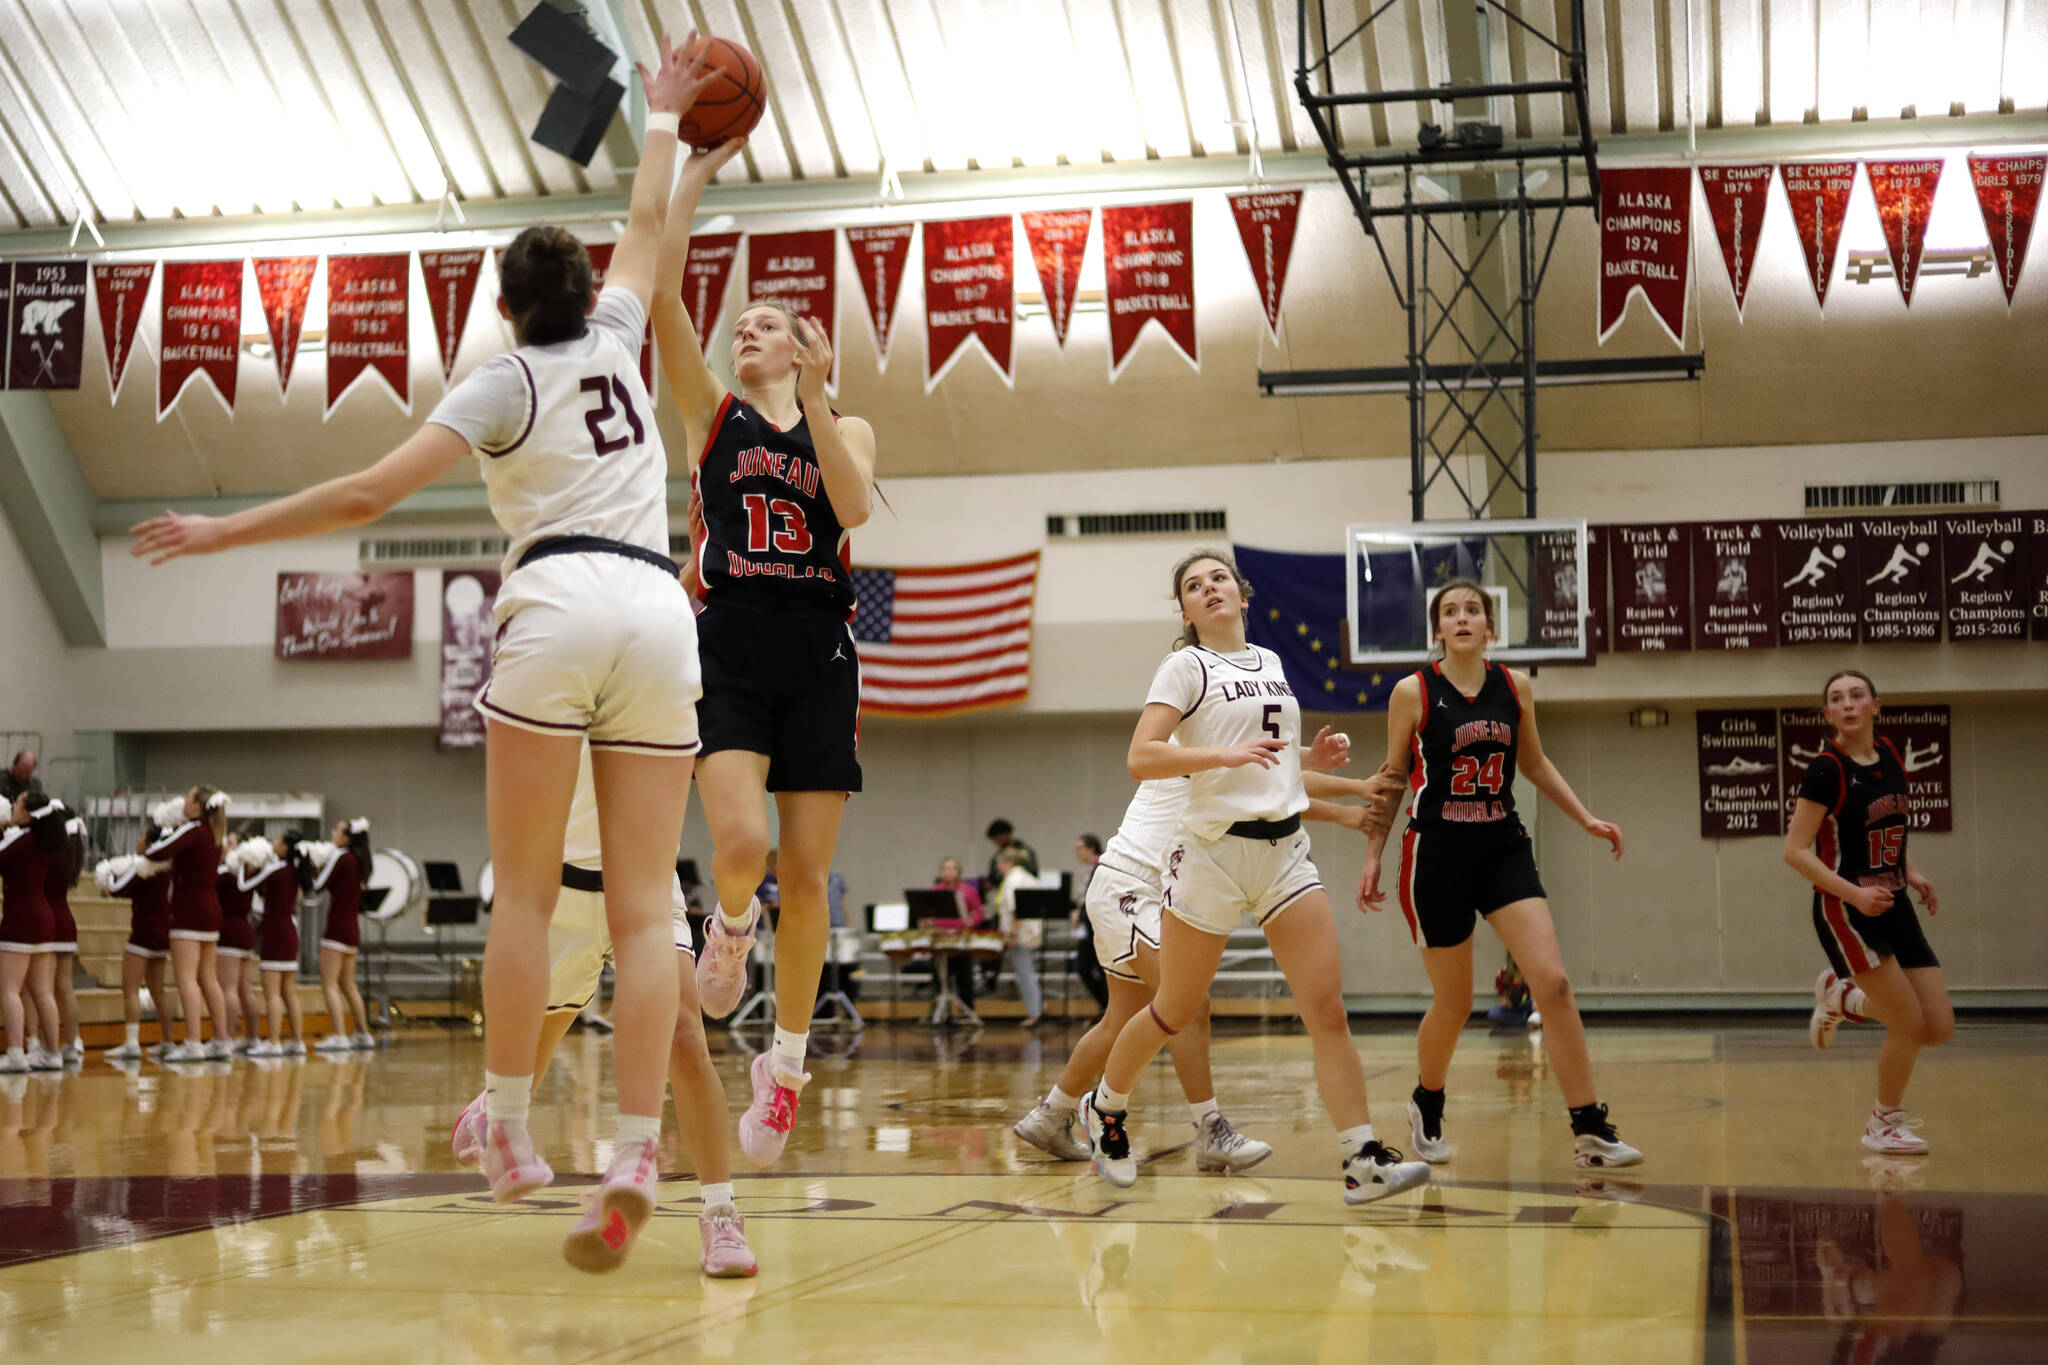 Kayhi’s Lindsay Byron (21) tries to block Juneau’s Skylar Tuckwood (13) as she attempts a layup Friday at Ketchikan High School. Juneau won 40 to 33. Photo by Christopher Mullen Ketchikan Daily News